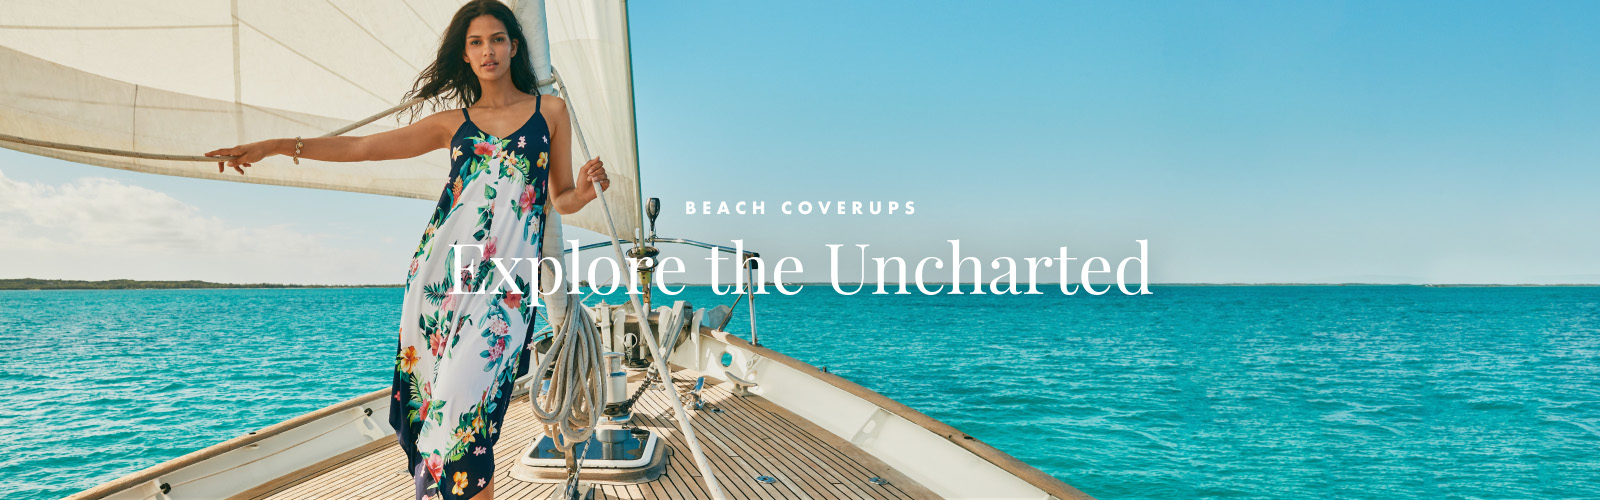 Beach Coverups - Explore the Uncharted